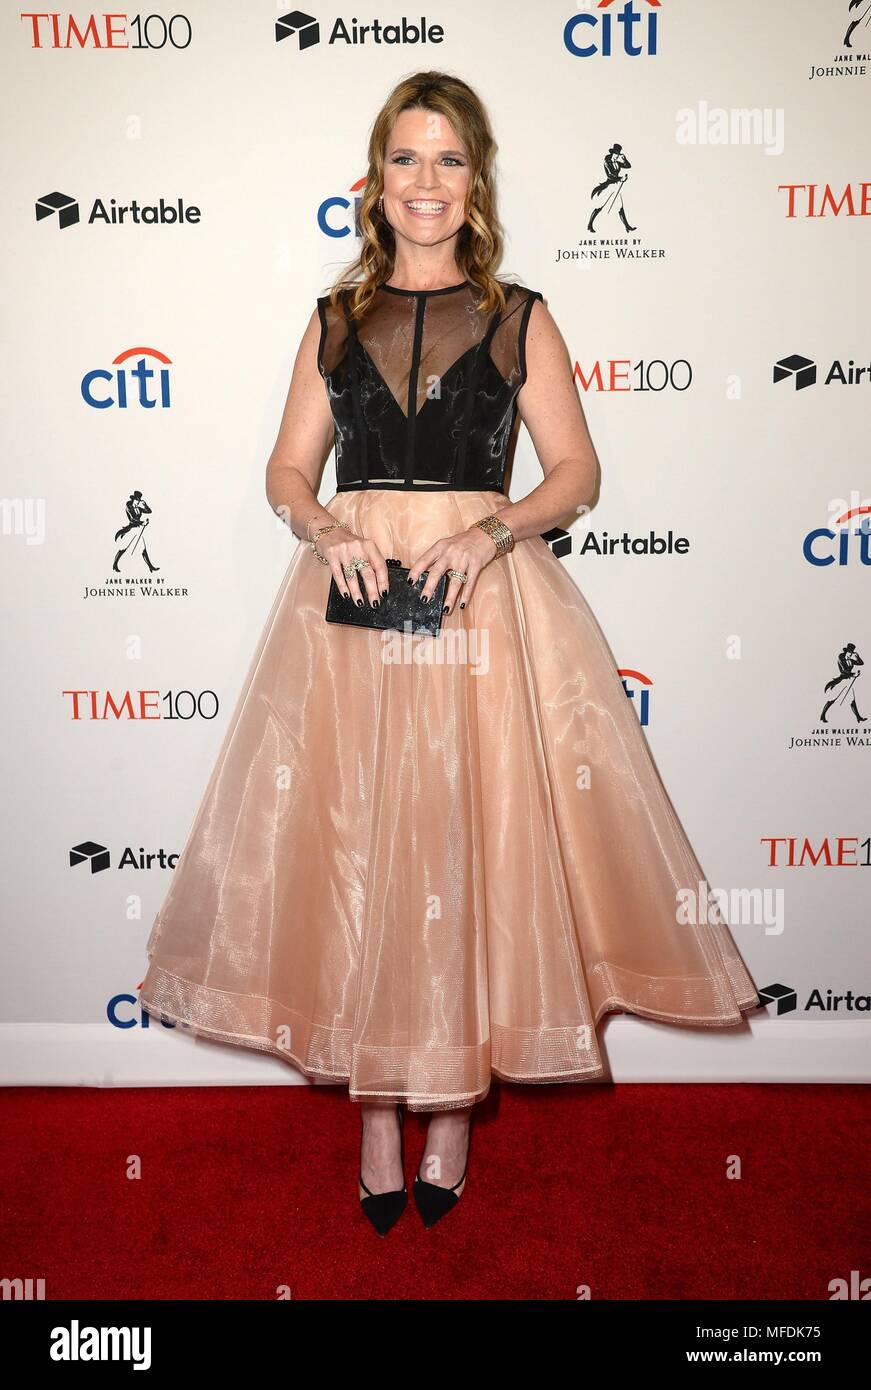 Savannah Guthrie at arrivals for TIME 100 Gala, Jazz at Lincoln Center's Frederick P. Rose Hall, New York, NY April 24, 2018. Photo By: Kristin Callahan/Everett Collection Stock Photo